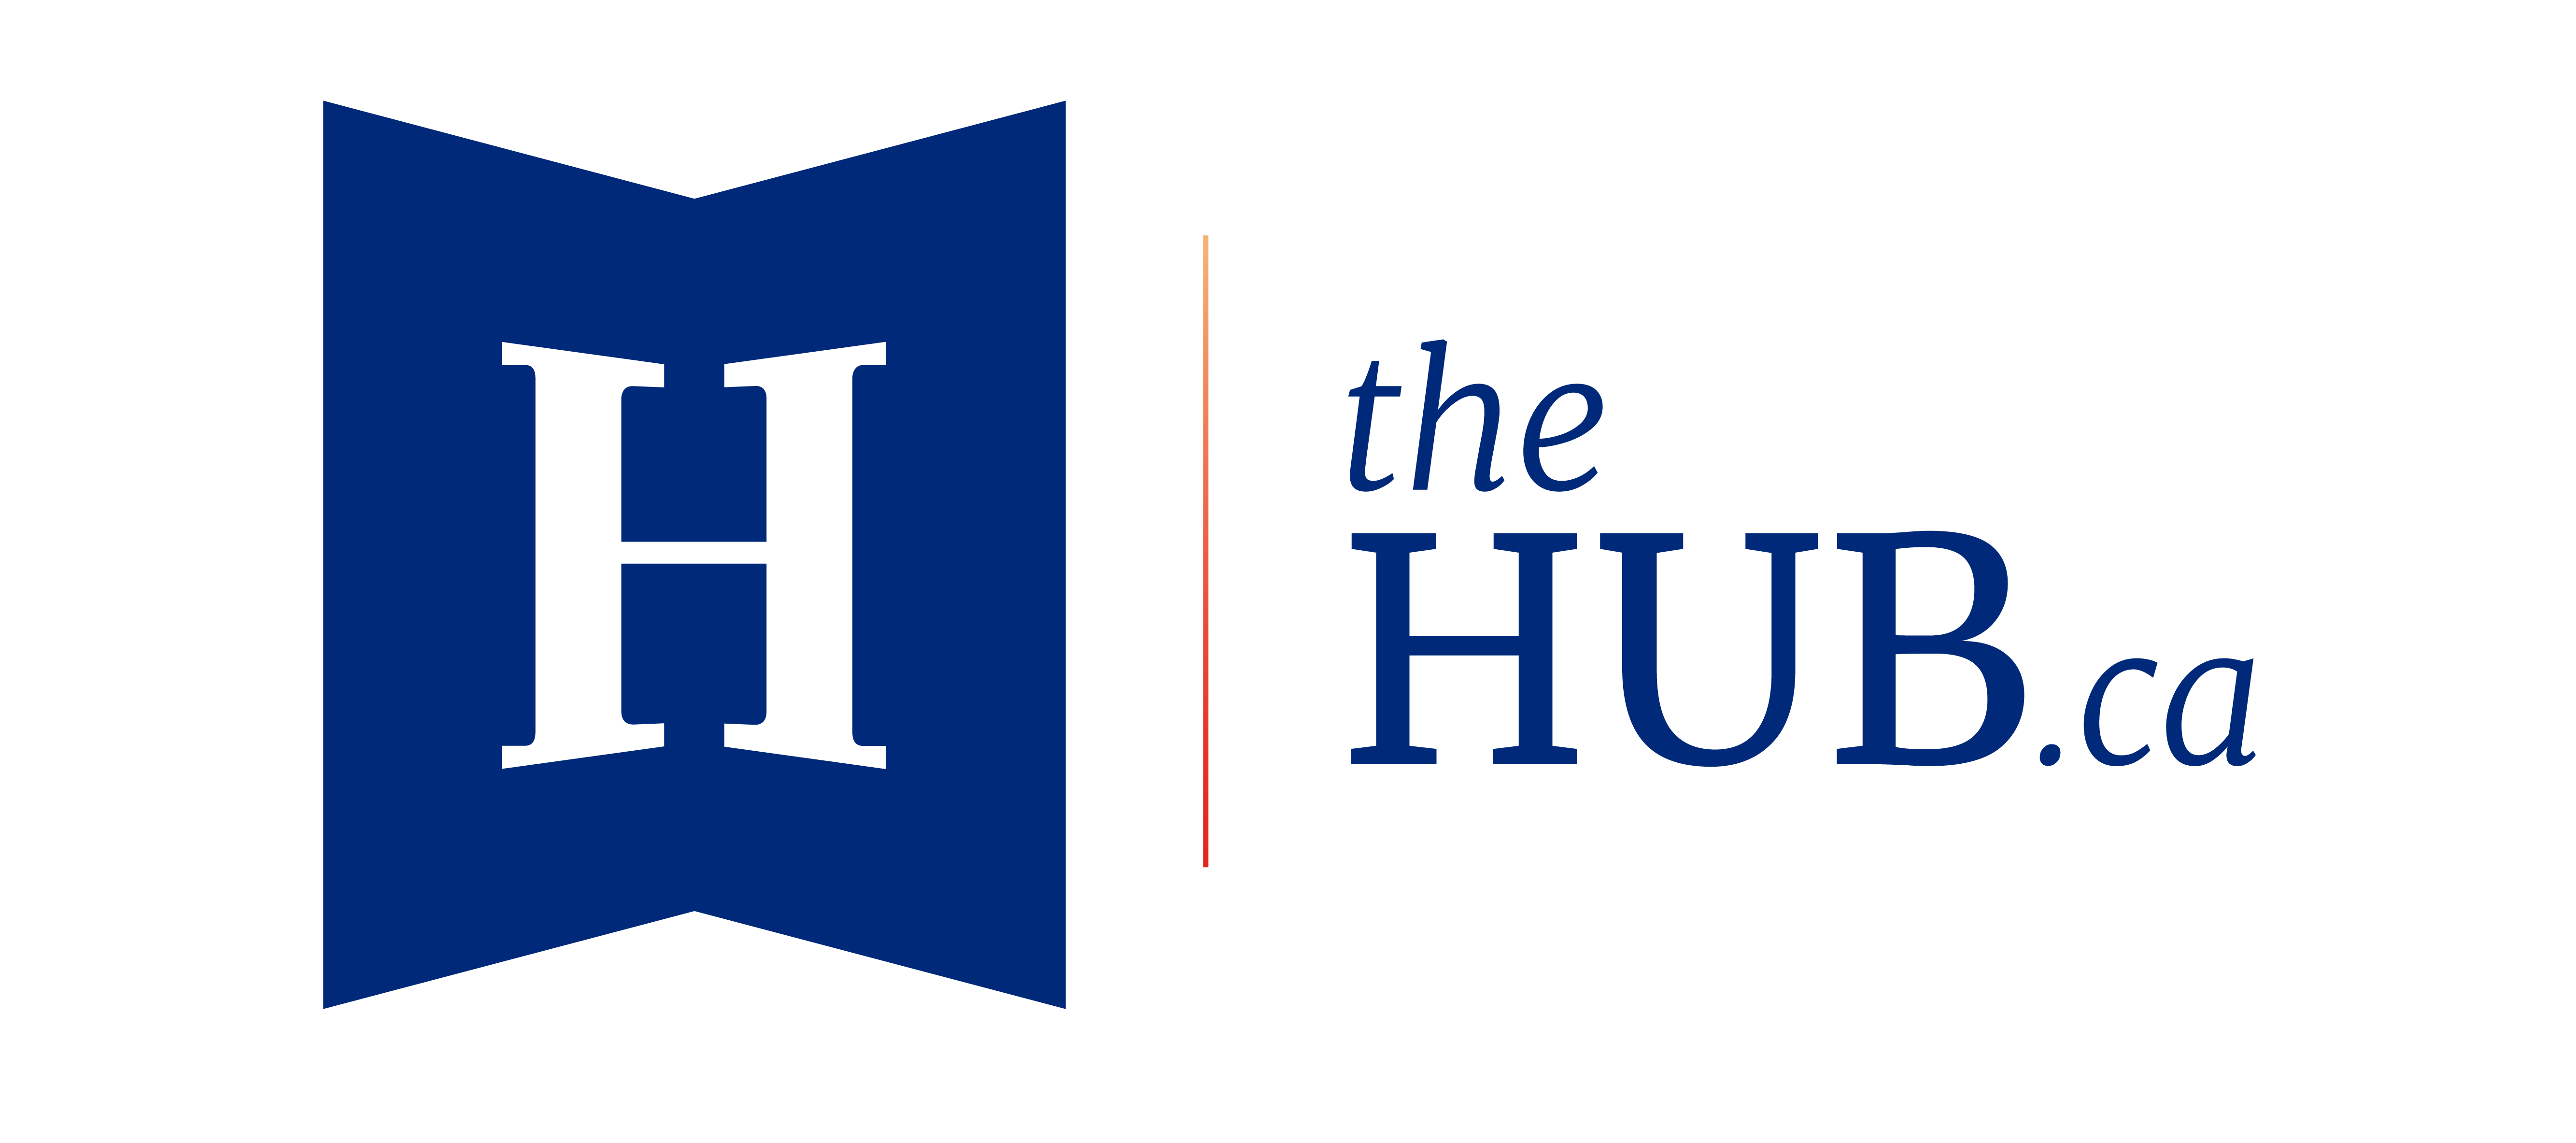 the hub logo, the co-sponsor of the event